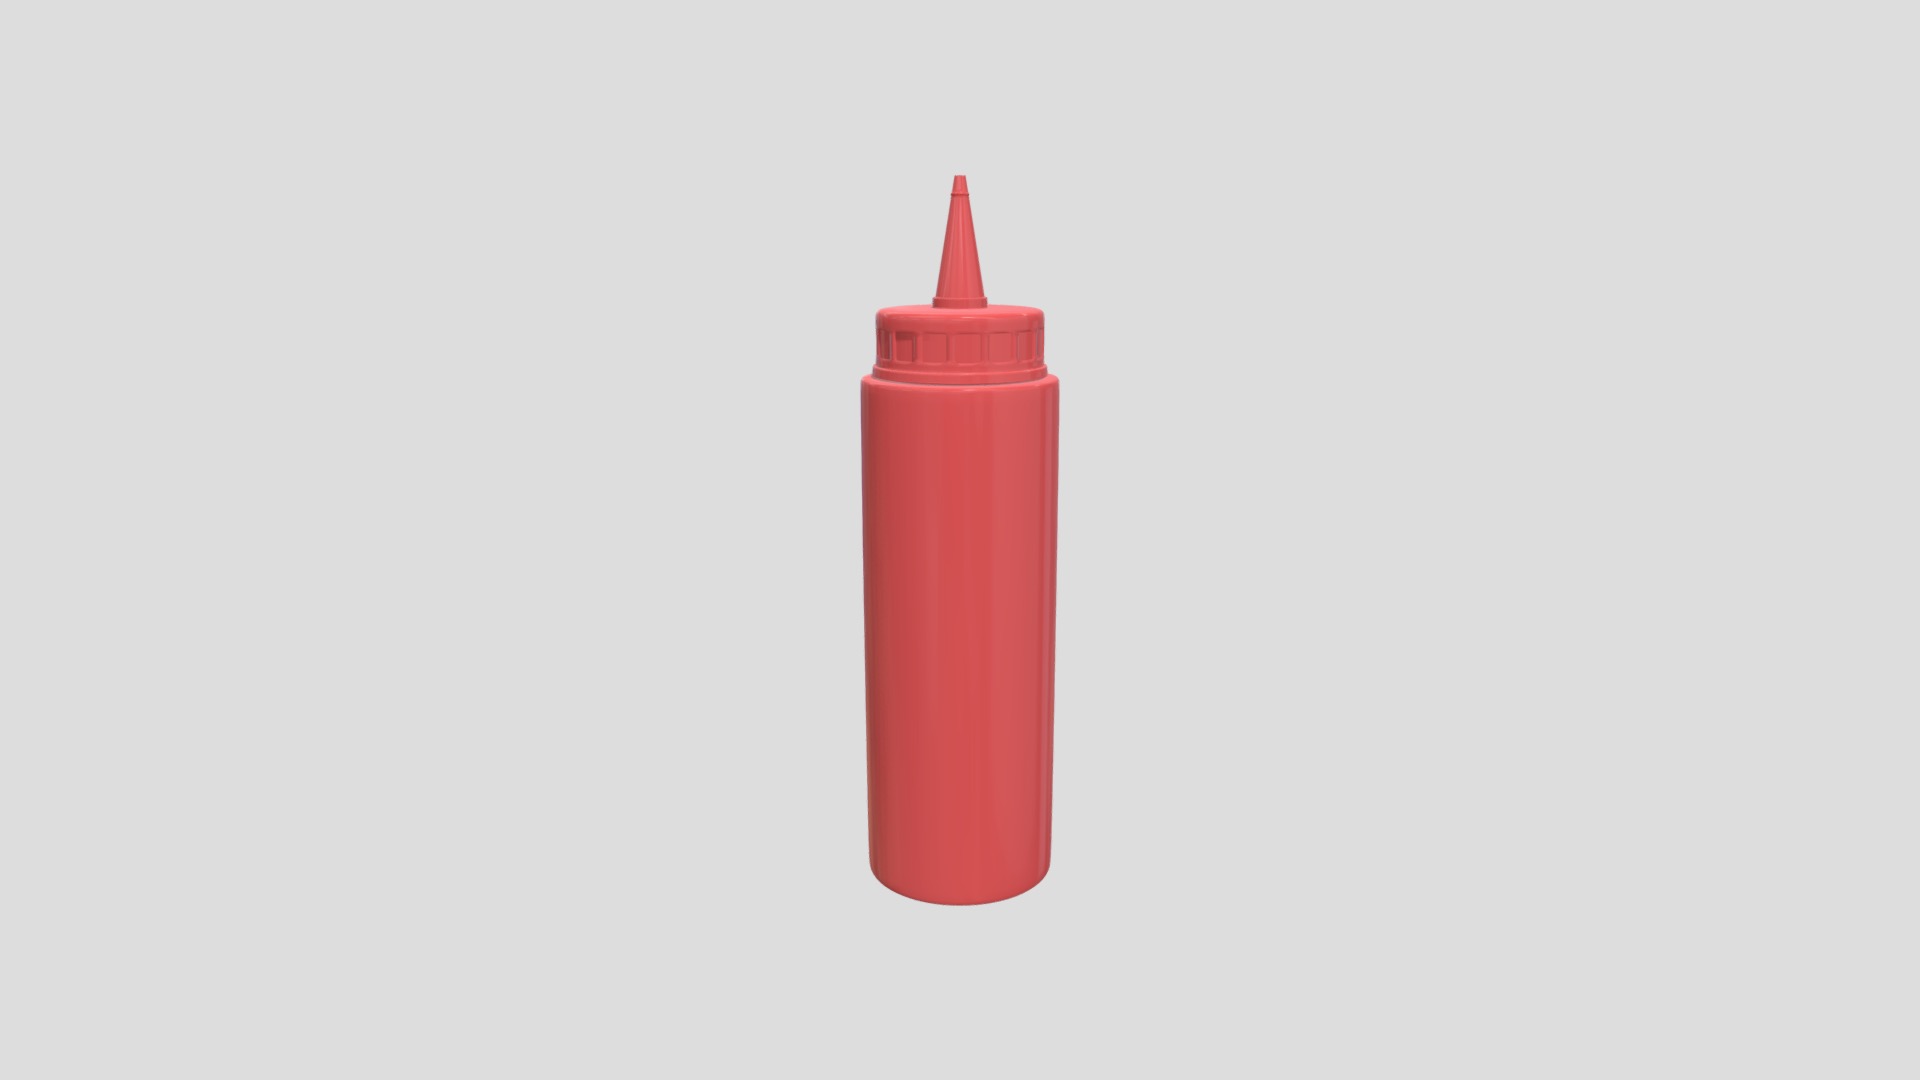 3D model Mustard - This is a 3D model of the Mustard. The 3D model is about a red plastic water bottle.